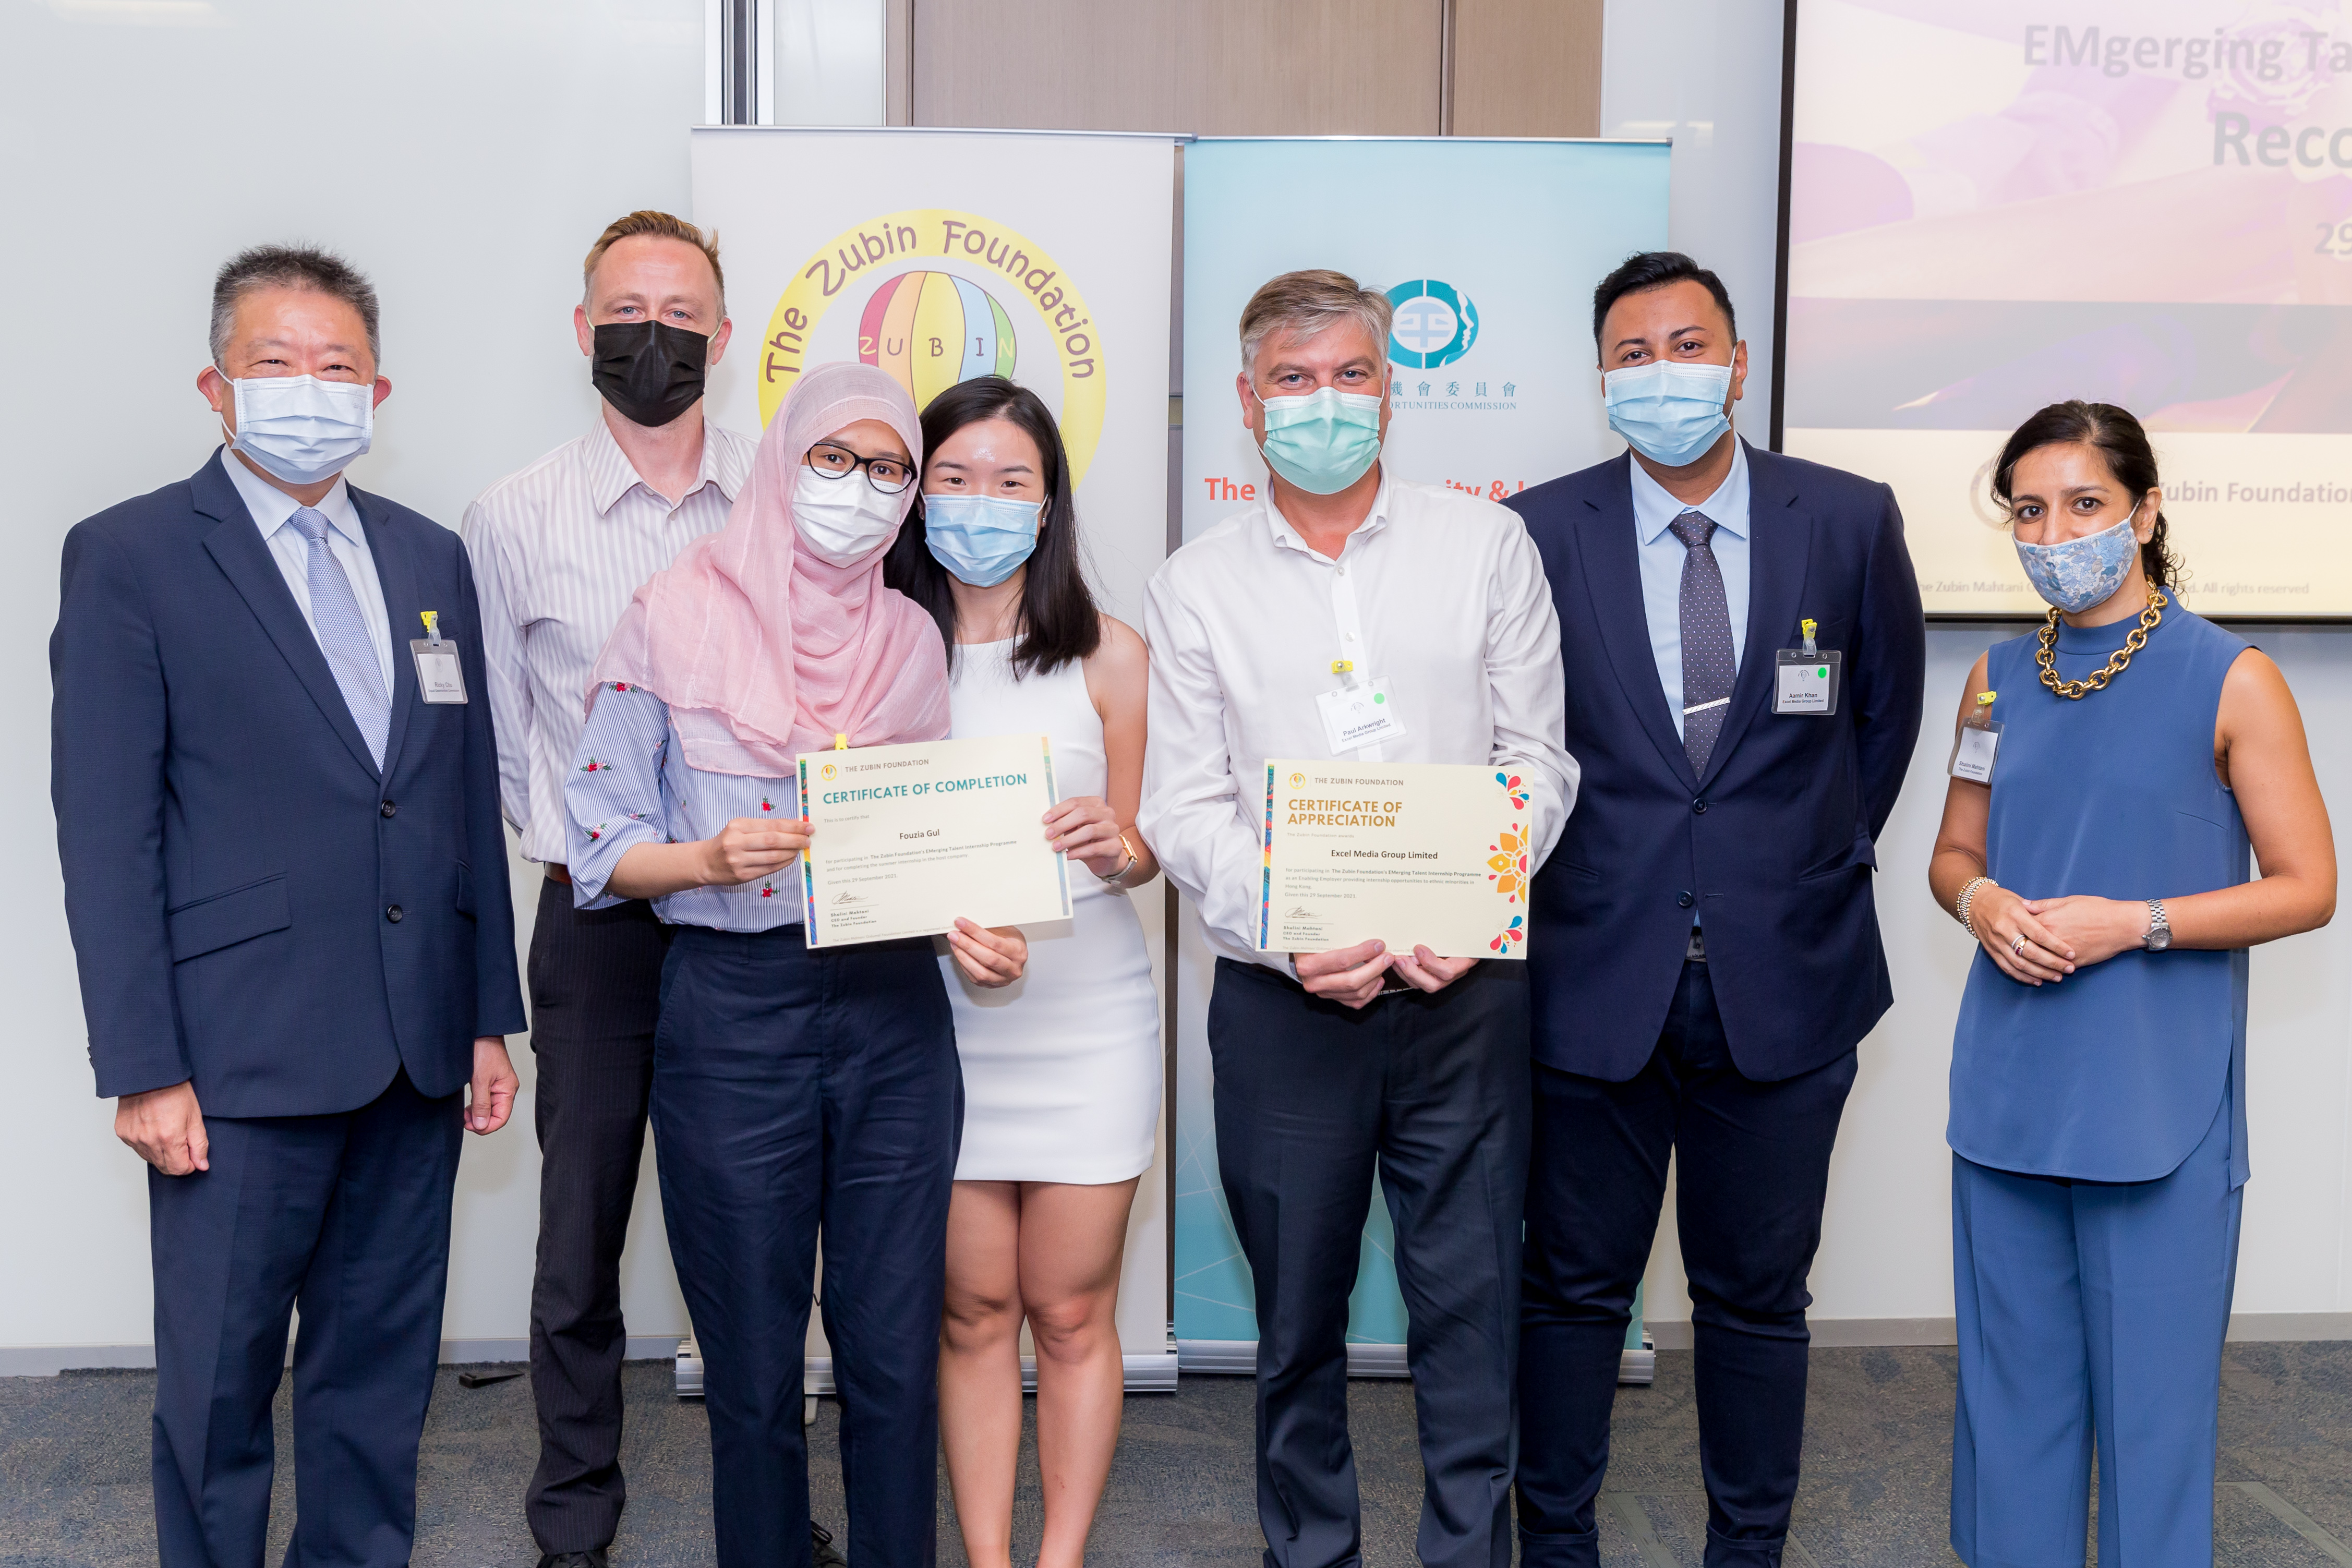 Mr Ricky CHU, Chairperson of the EOC (first from left); Shalini MAHTANI, Founder and CEO of The Zubin Foundation (first from right) presented certificates to the non-ethnic Chinese student interns and company representatives.